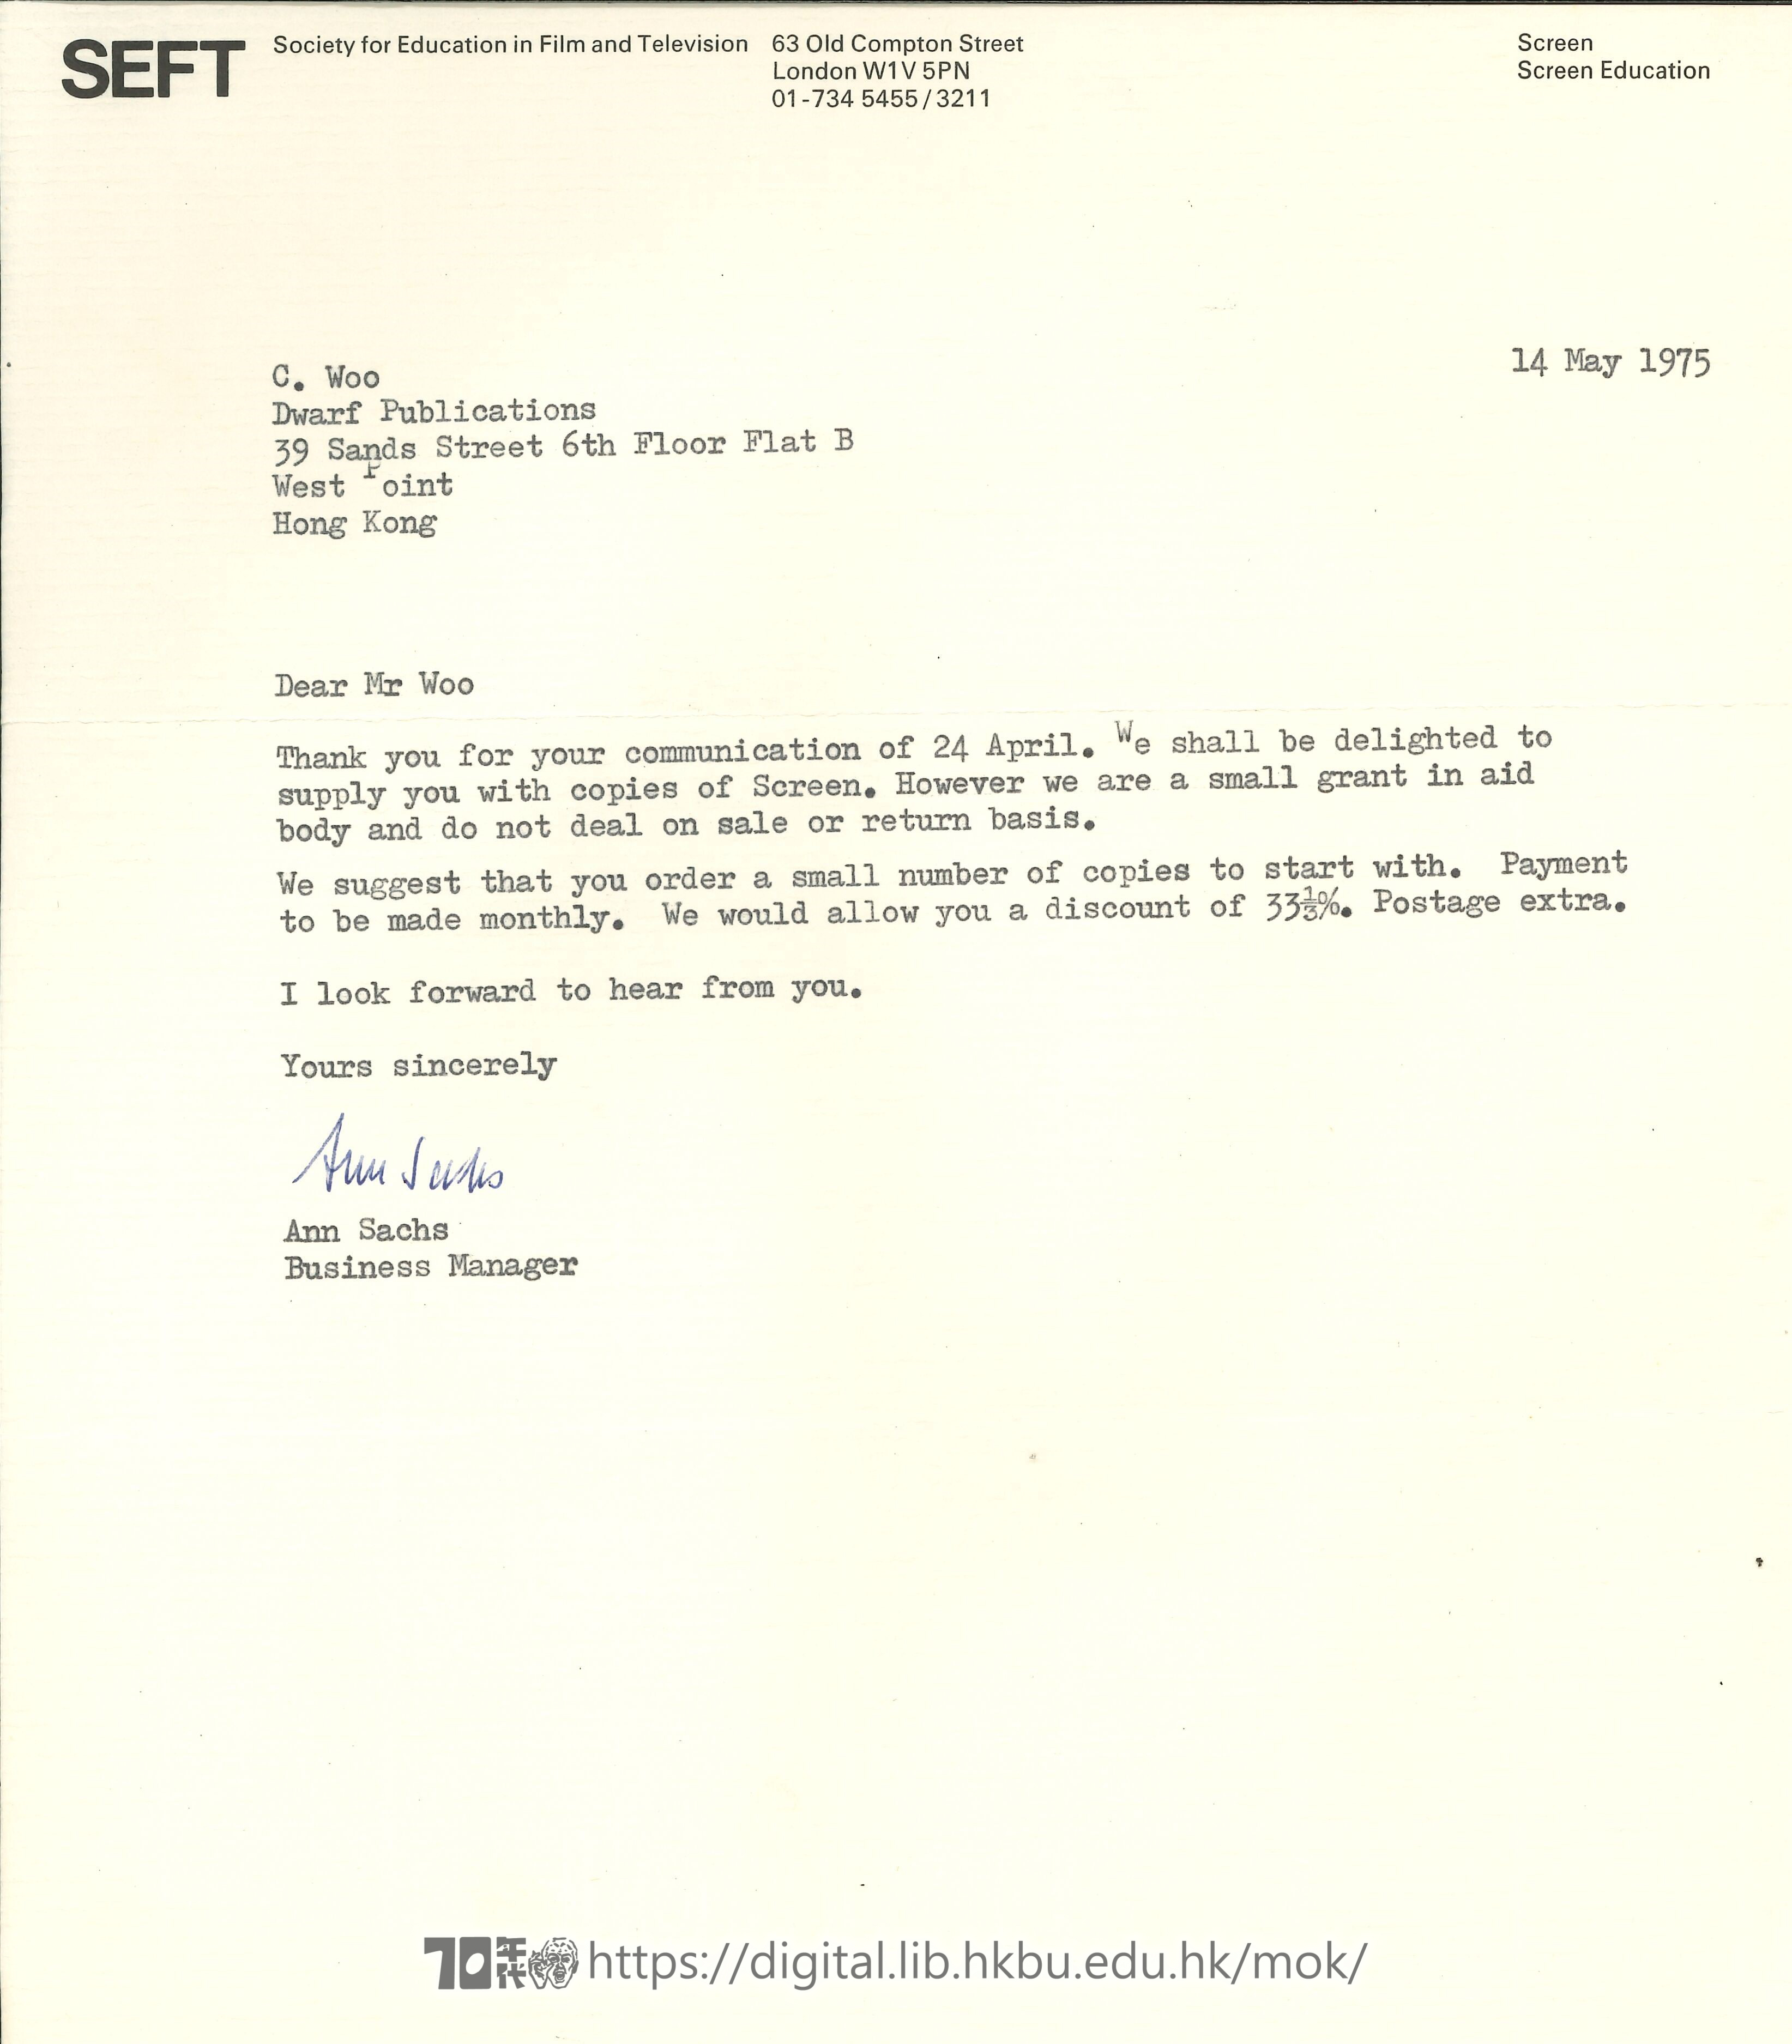   Letter from Anna Sachs, Society for Education in Film and Television to Mr Woo SACHS, Anna 